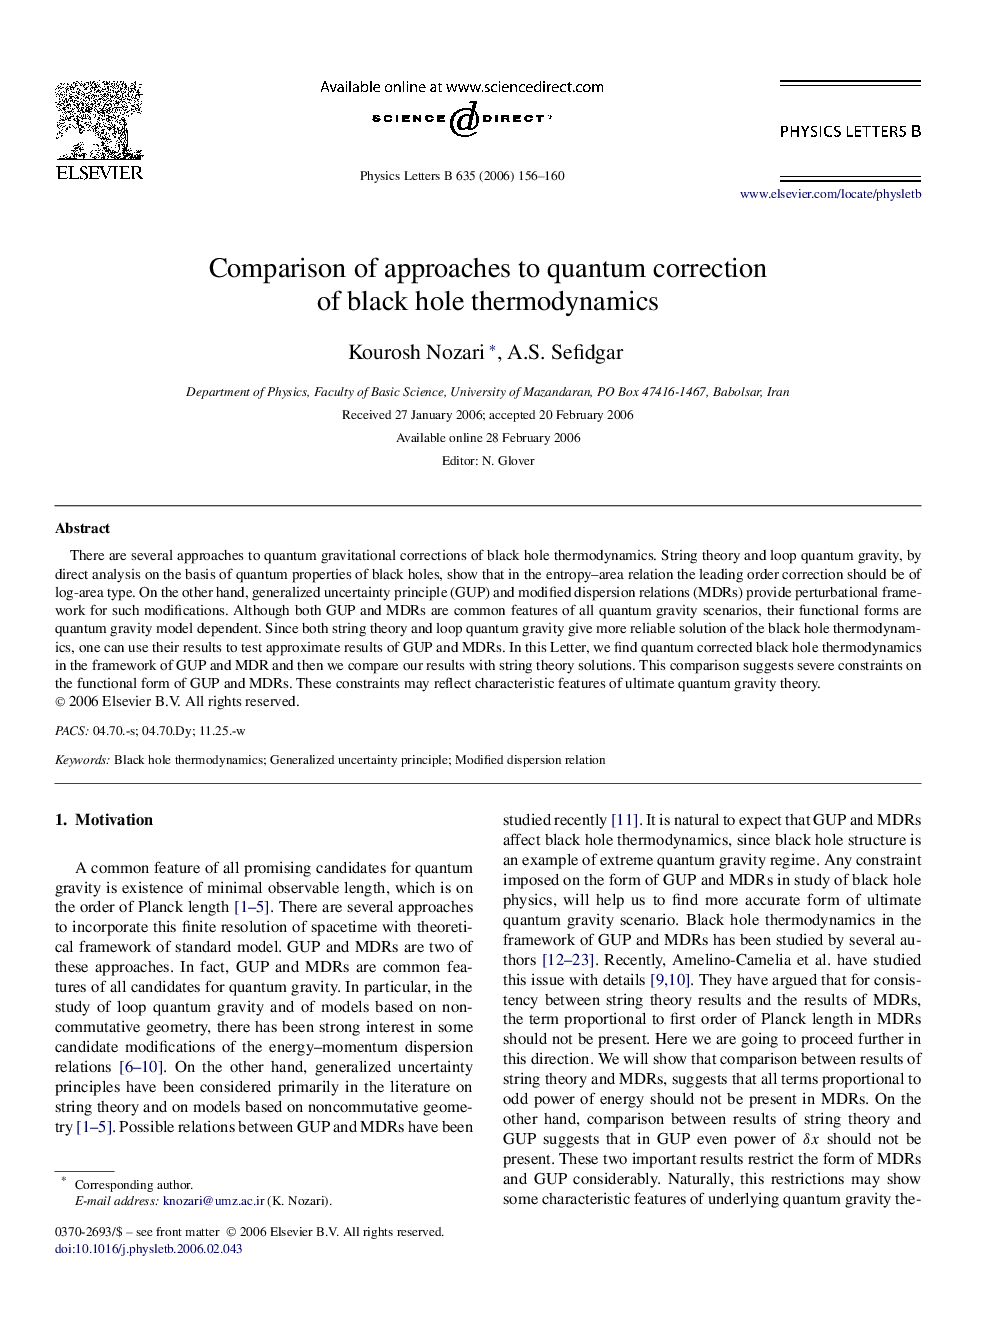 Comparison of approaches to quantum correction of black hole thermodynamics